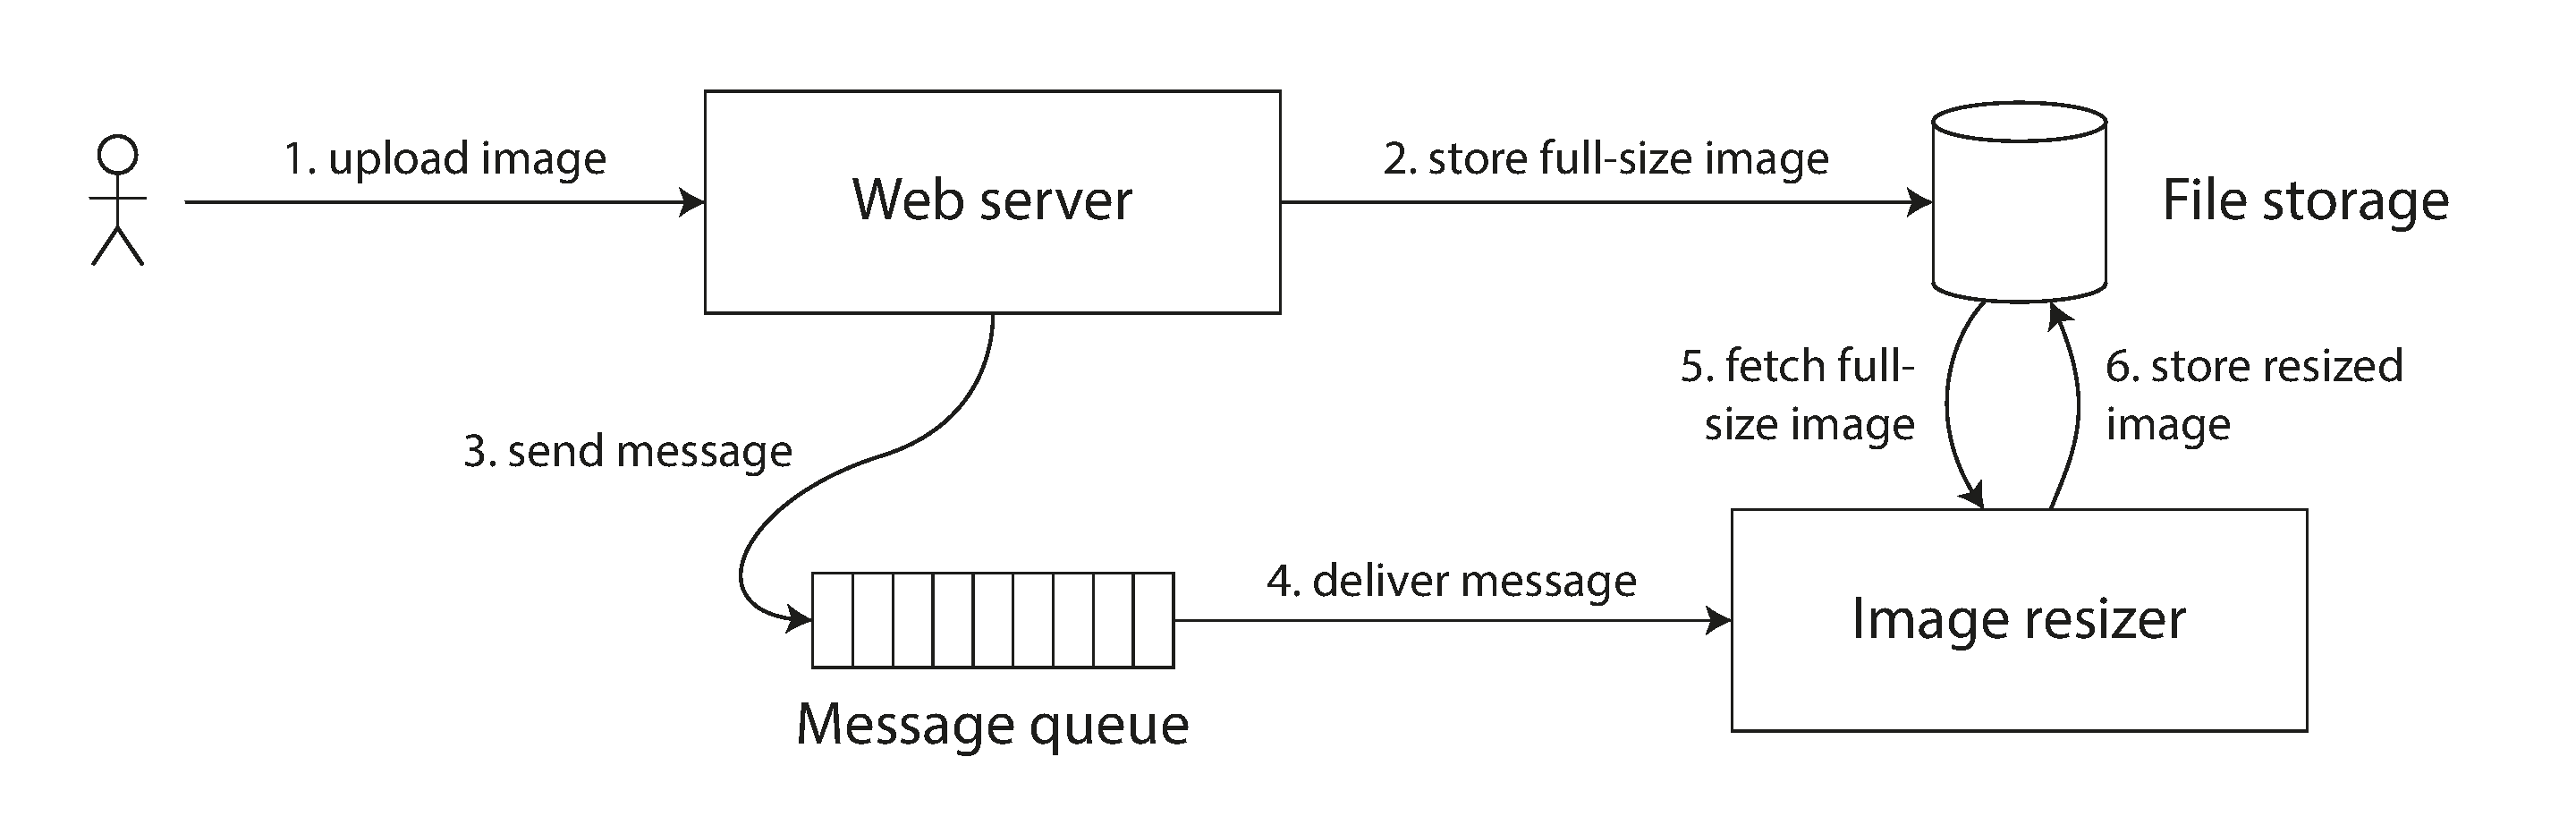 Figure 9-5. The web server and image resizer communicate both through file storage and a message queue,  opening the potential for race conditions